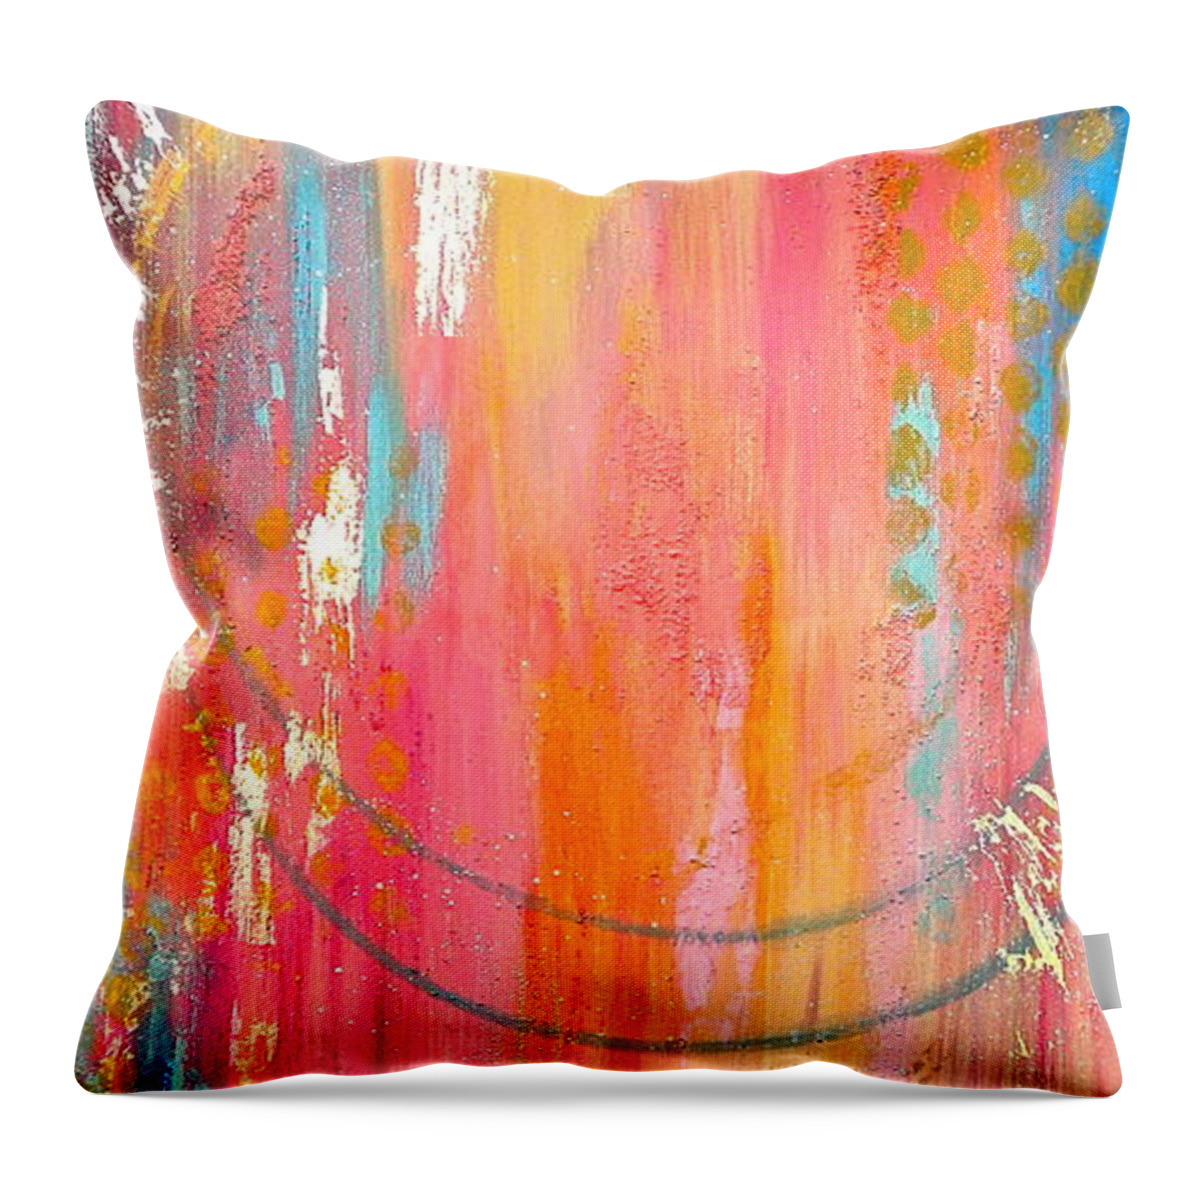 Dynamic Connection Throw Pillow featuring the painting Dynamic Connection by Debi Starr